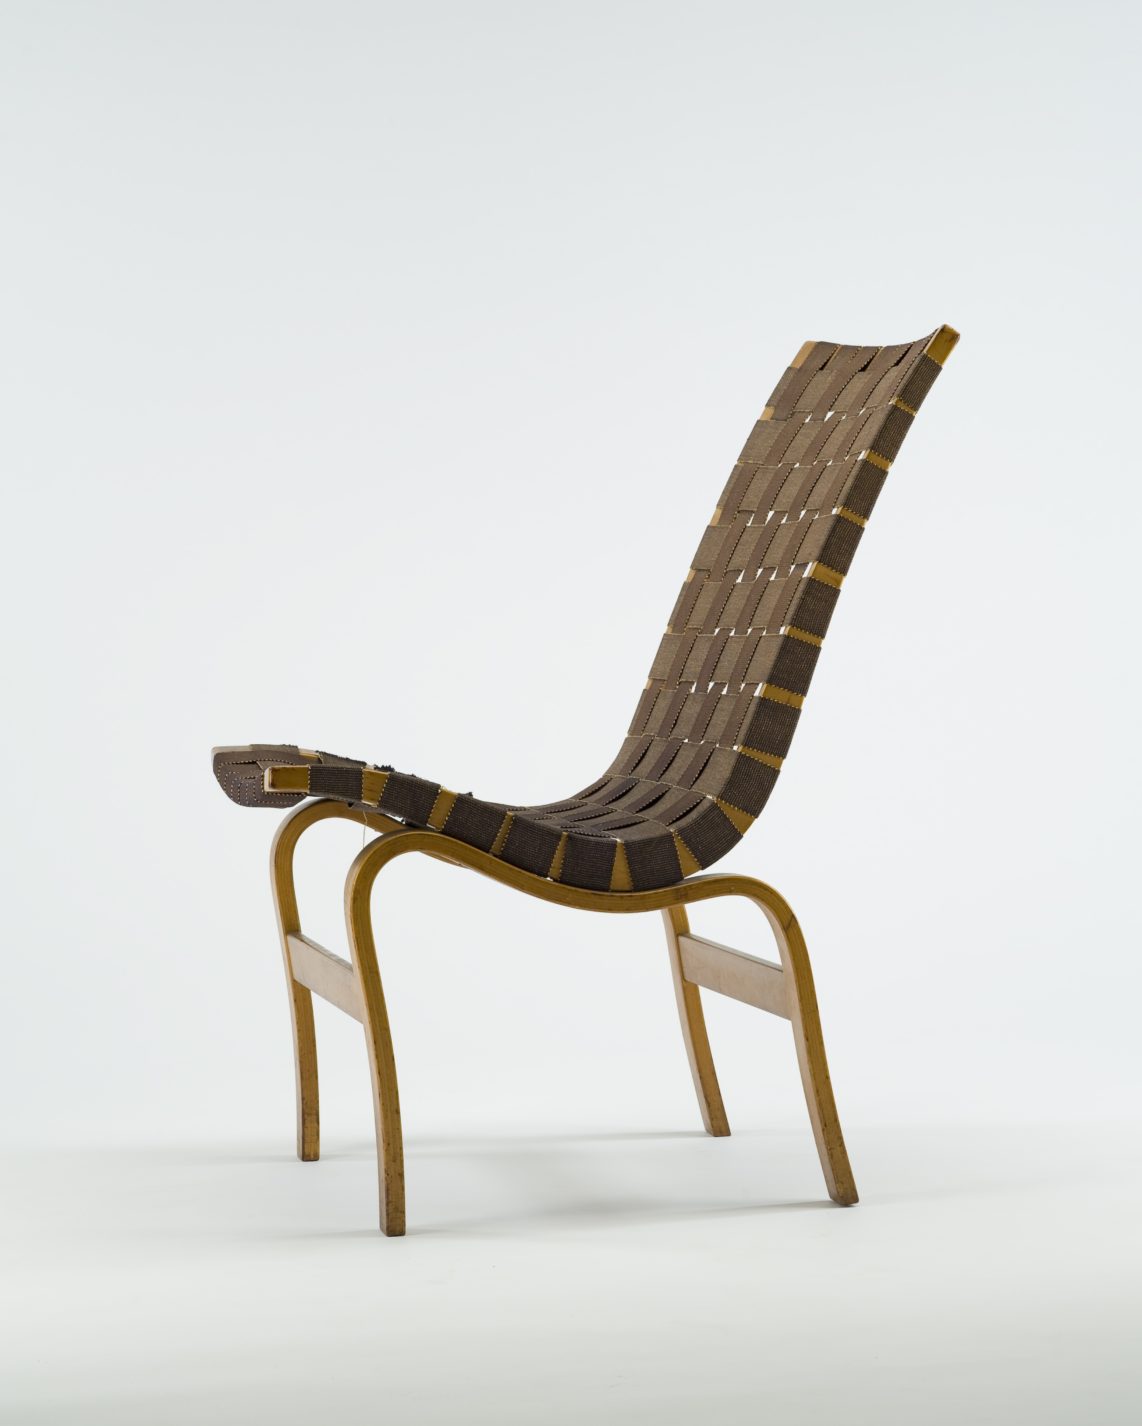 Tall-backed chair with curving bentwood frame and seat and back made of woven strips of brown jute.